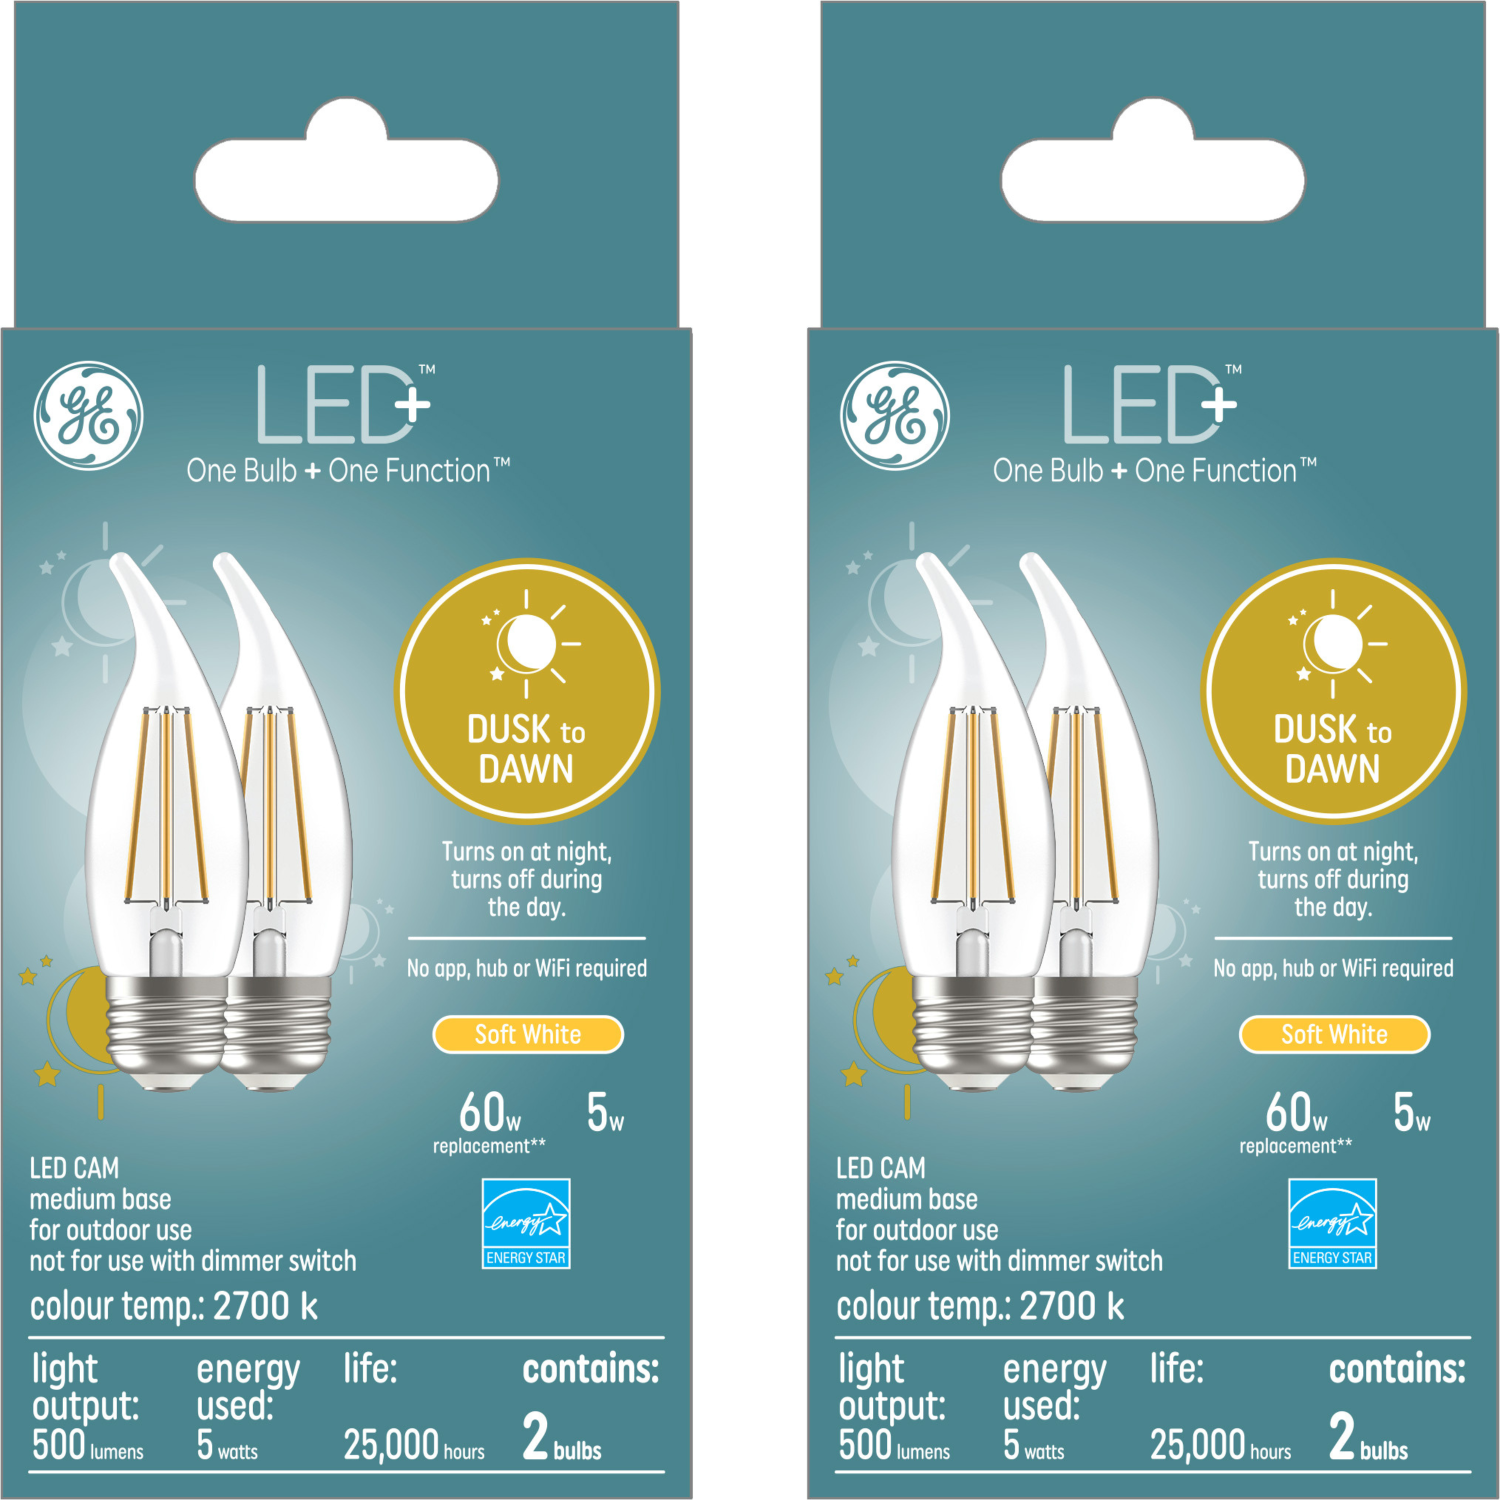 GE Lighting LED+ Dusk to Dawn Soft White 60W Replacement LED Clear Decorative Medium Base CAM Light Bulbs (Includes TWO 2-packs)